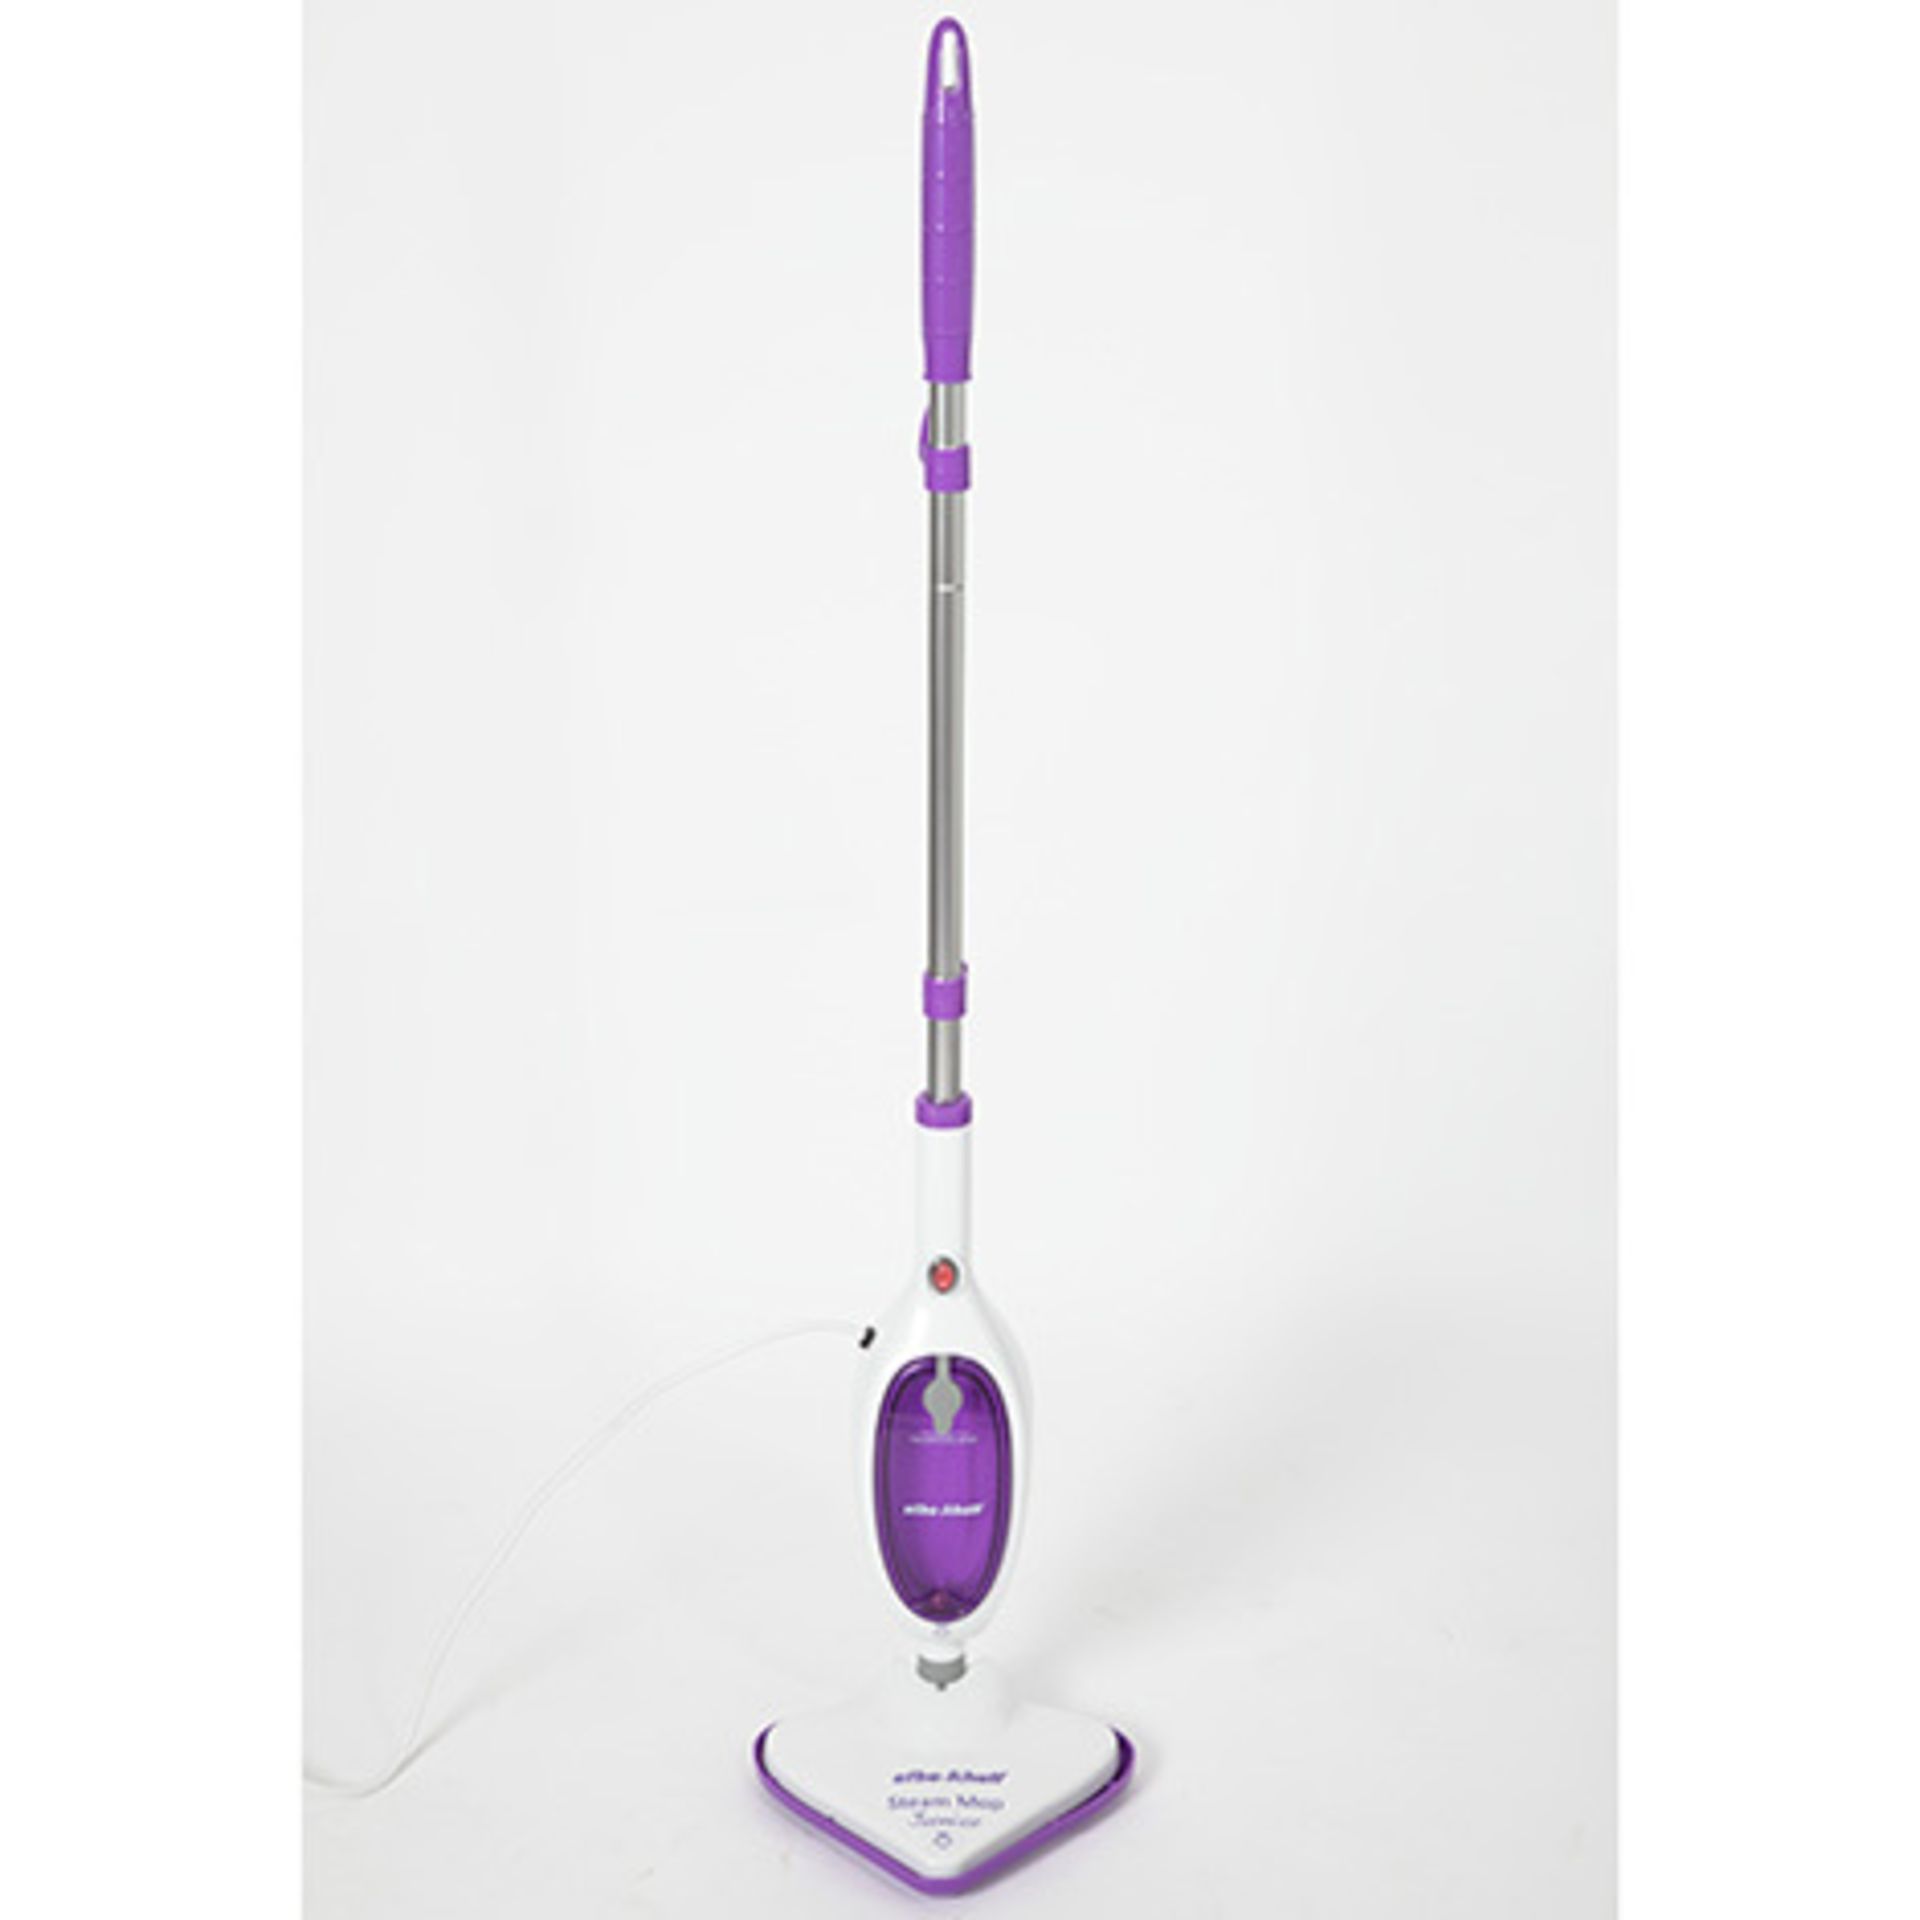 V Brand New Efbe-Schott Steam Mop (New And Boxed) Colours And Model May Vary RRP59.99 - Image 2 of 2